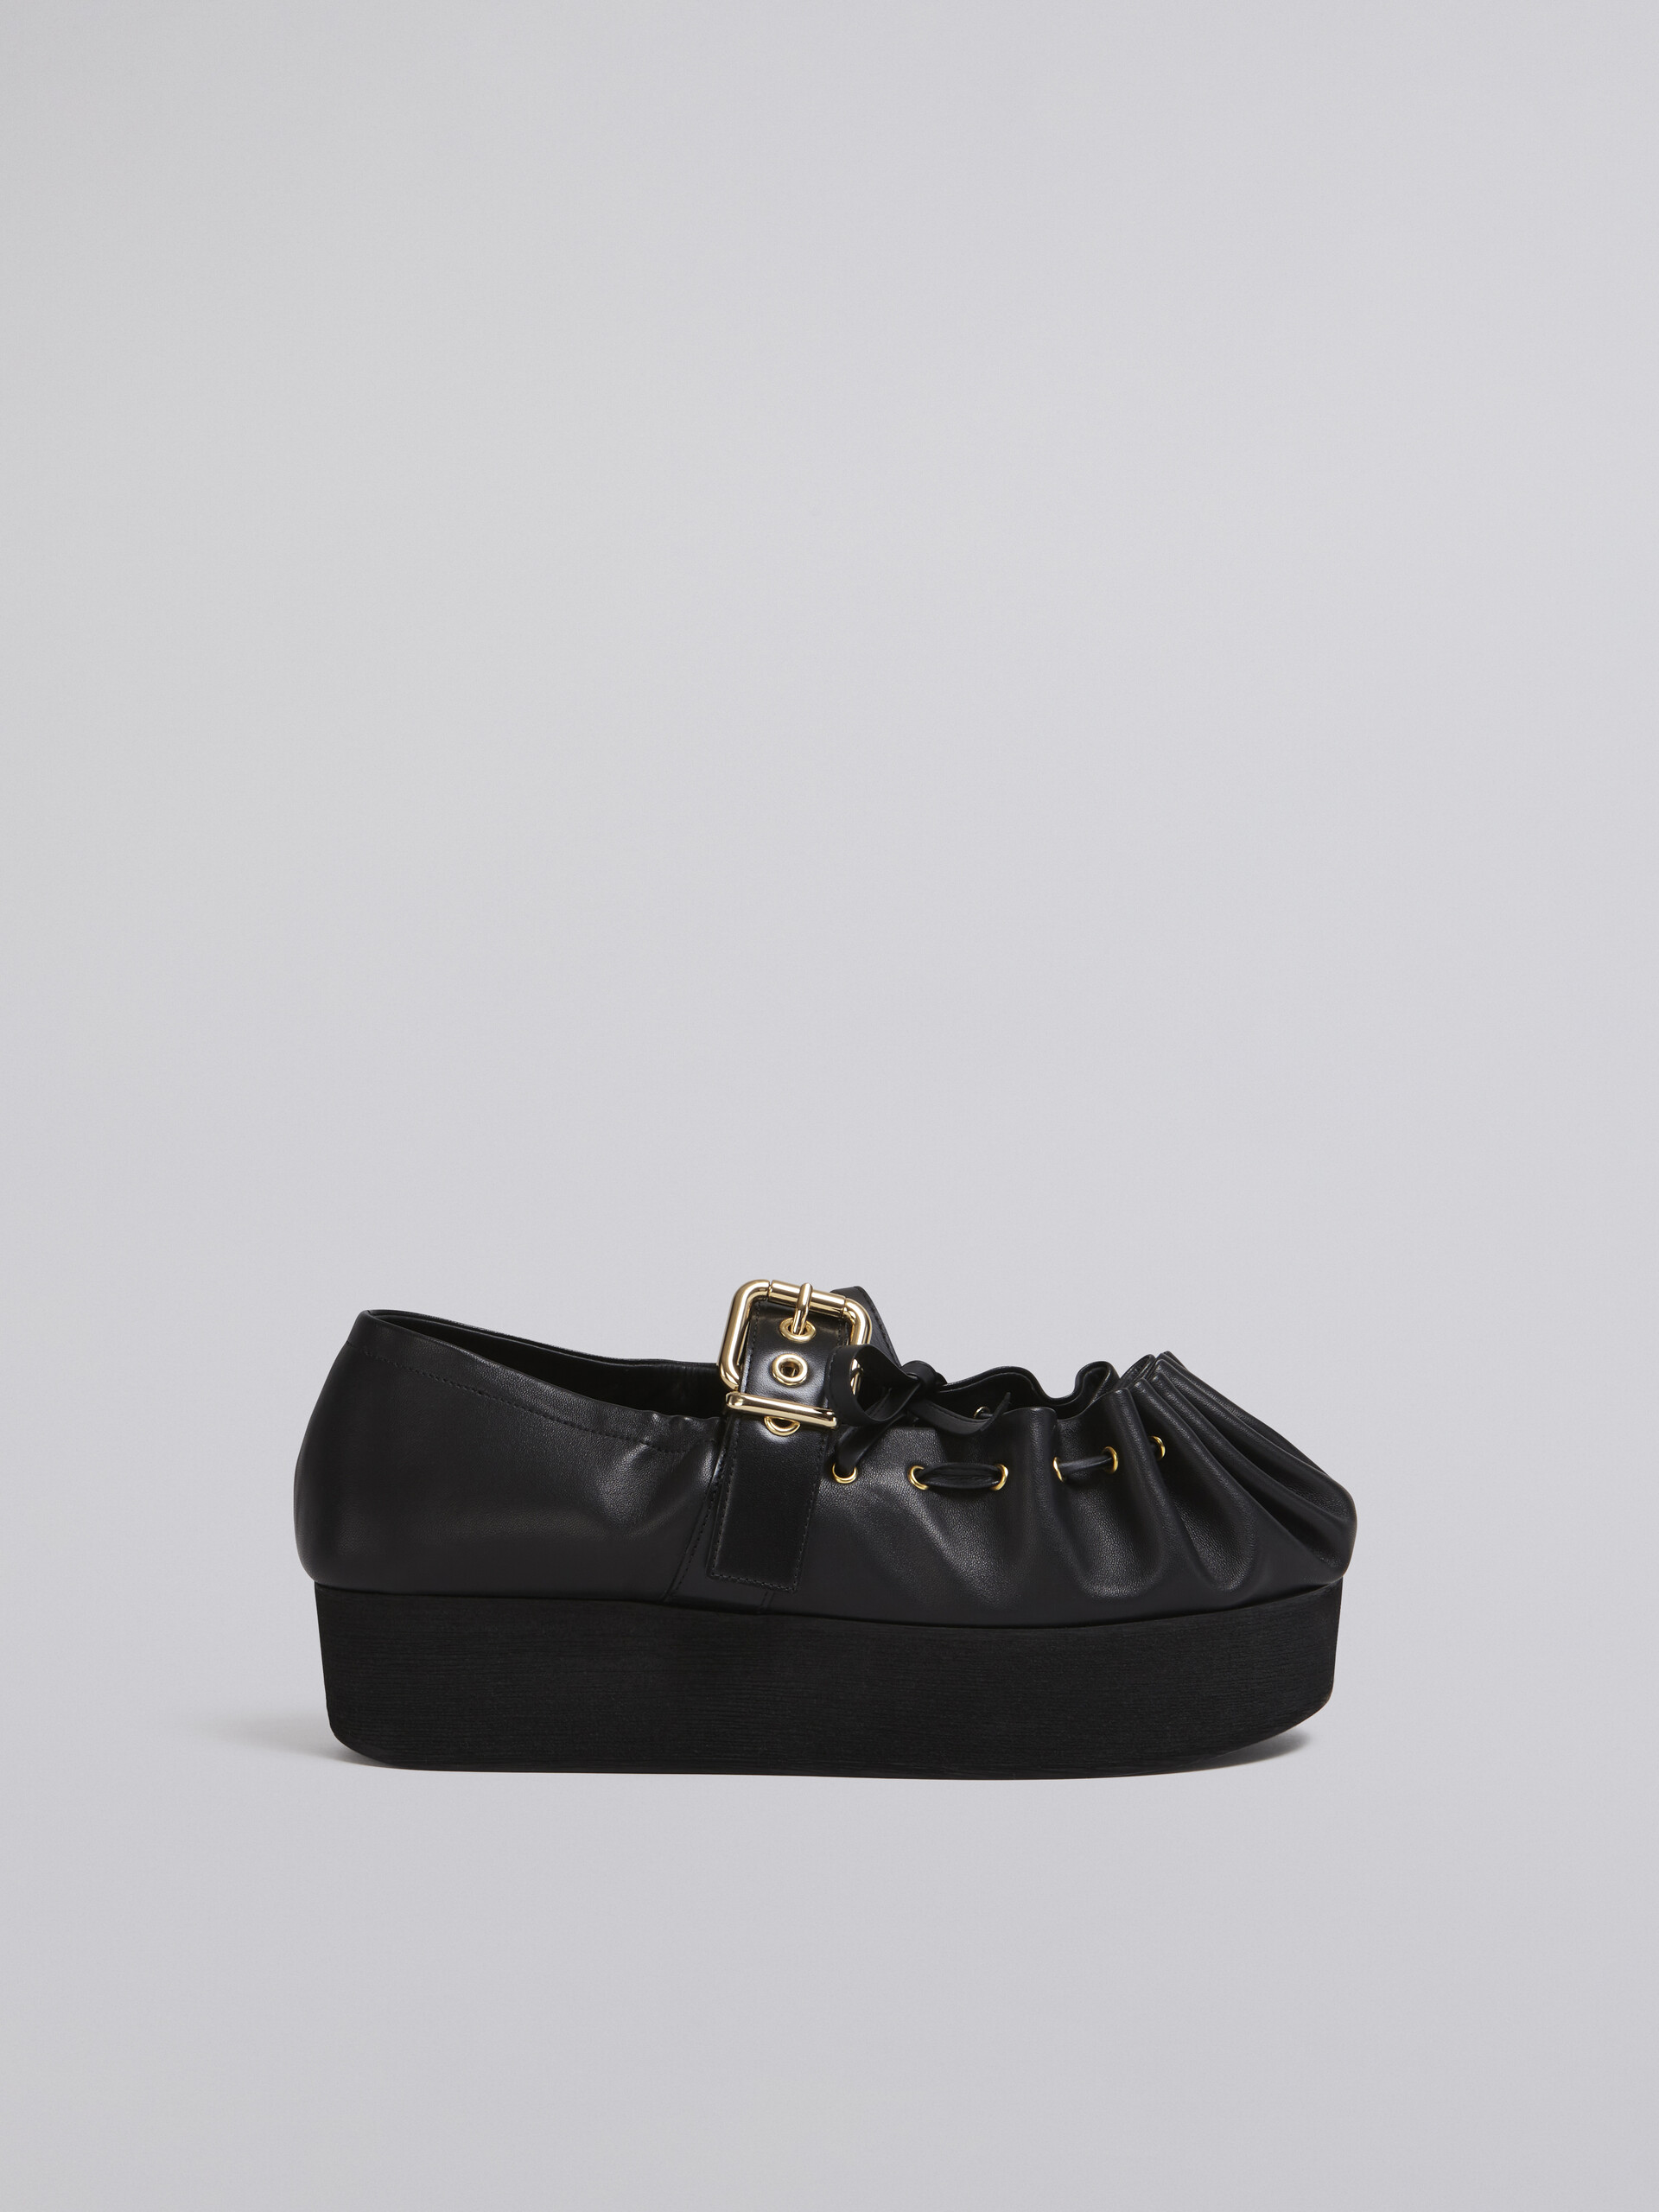 Nappa leather ballerina with rouched rounded captoe - Sandals - Image 1